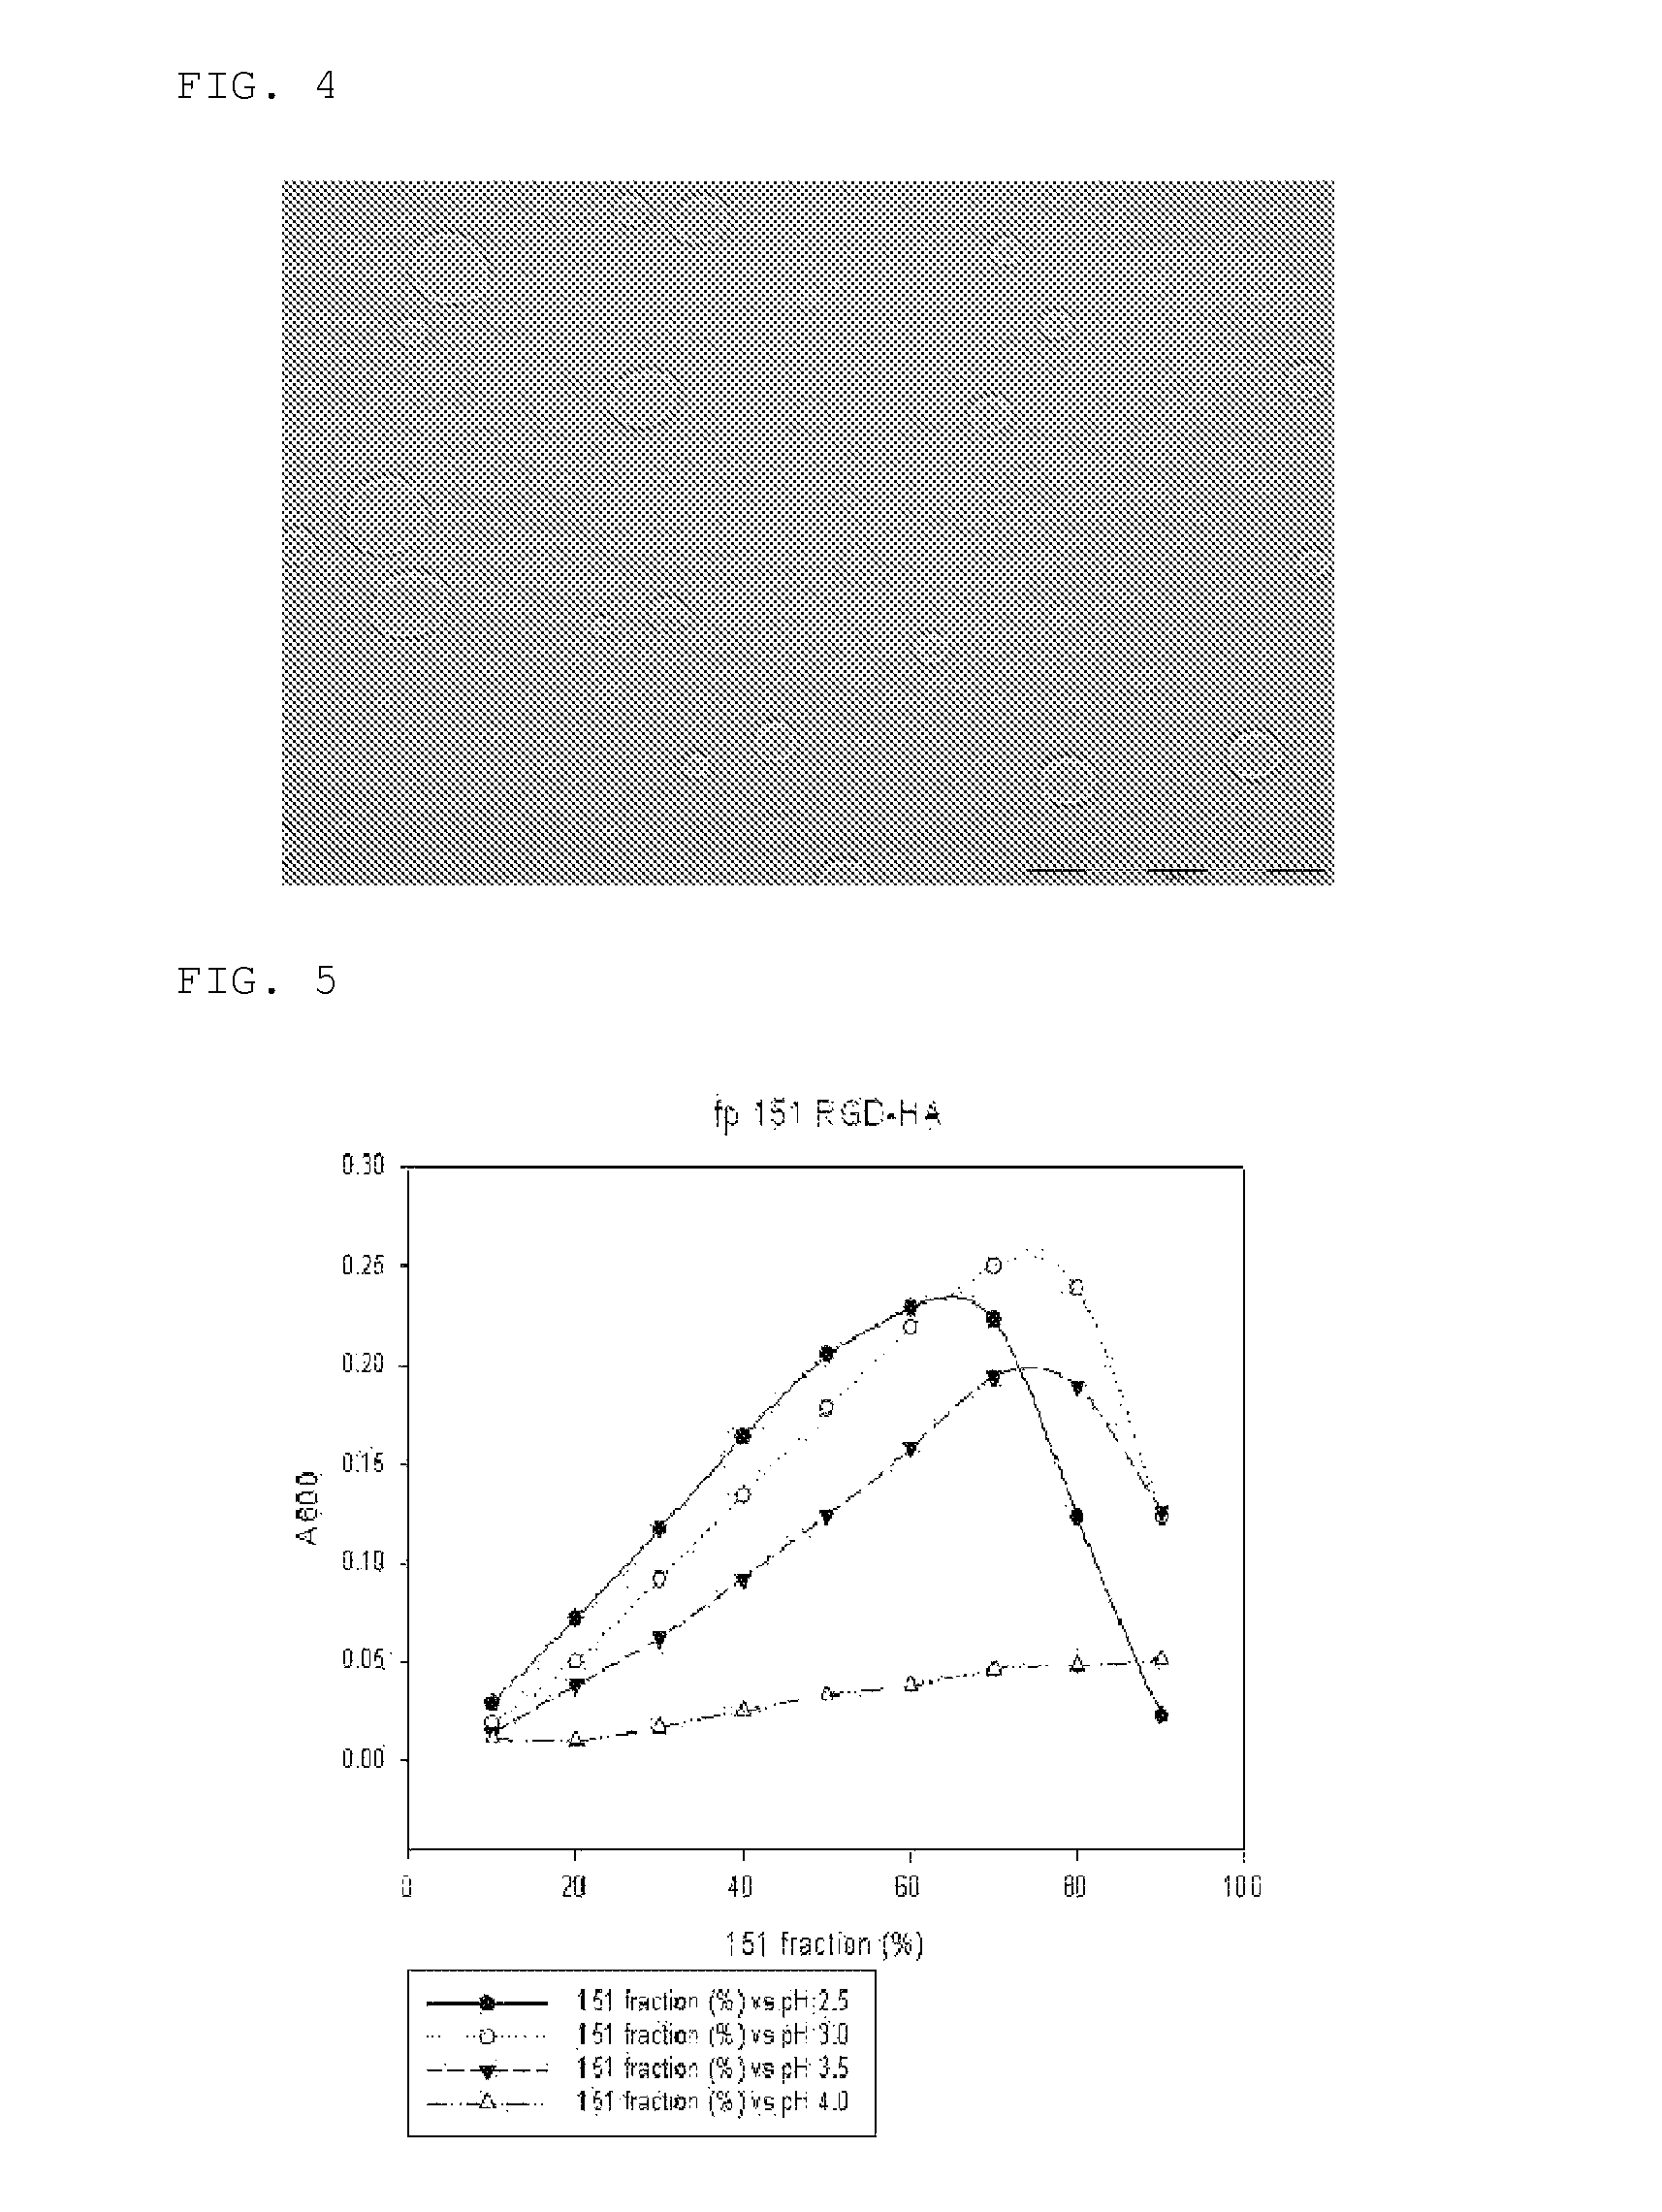 Coacervate having an ionic polymer mixed with the adhesive protein of a mussel or of a species of the variome thereof